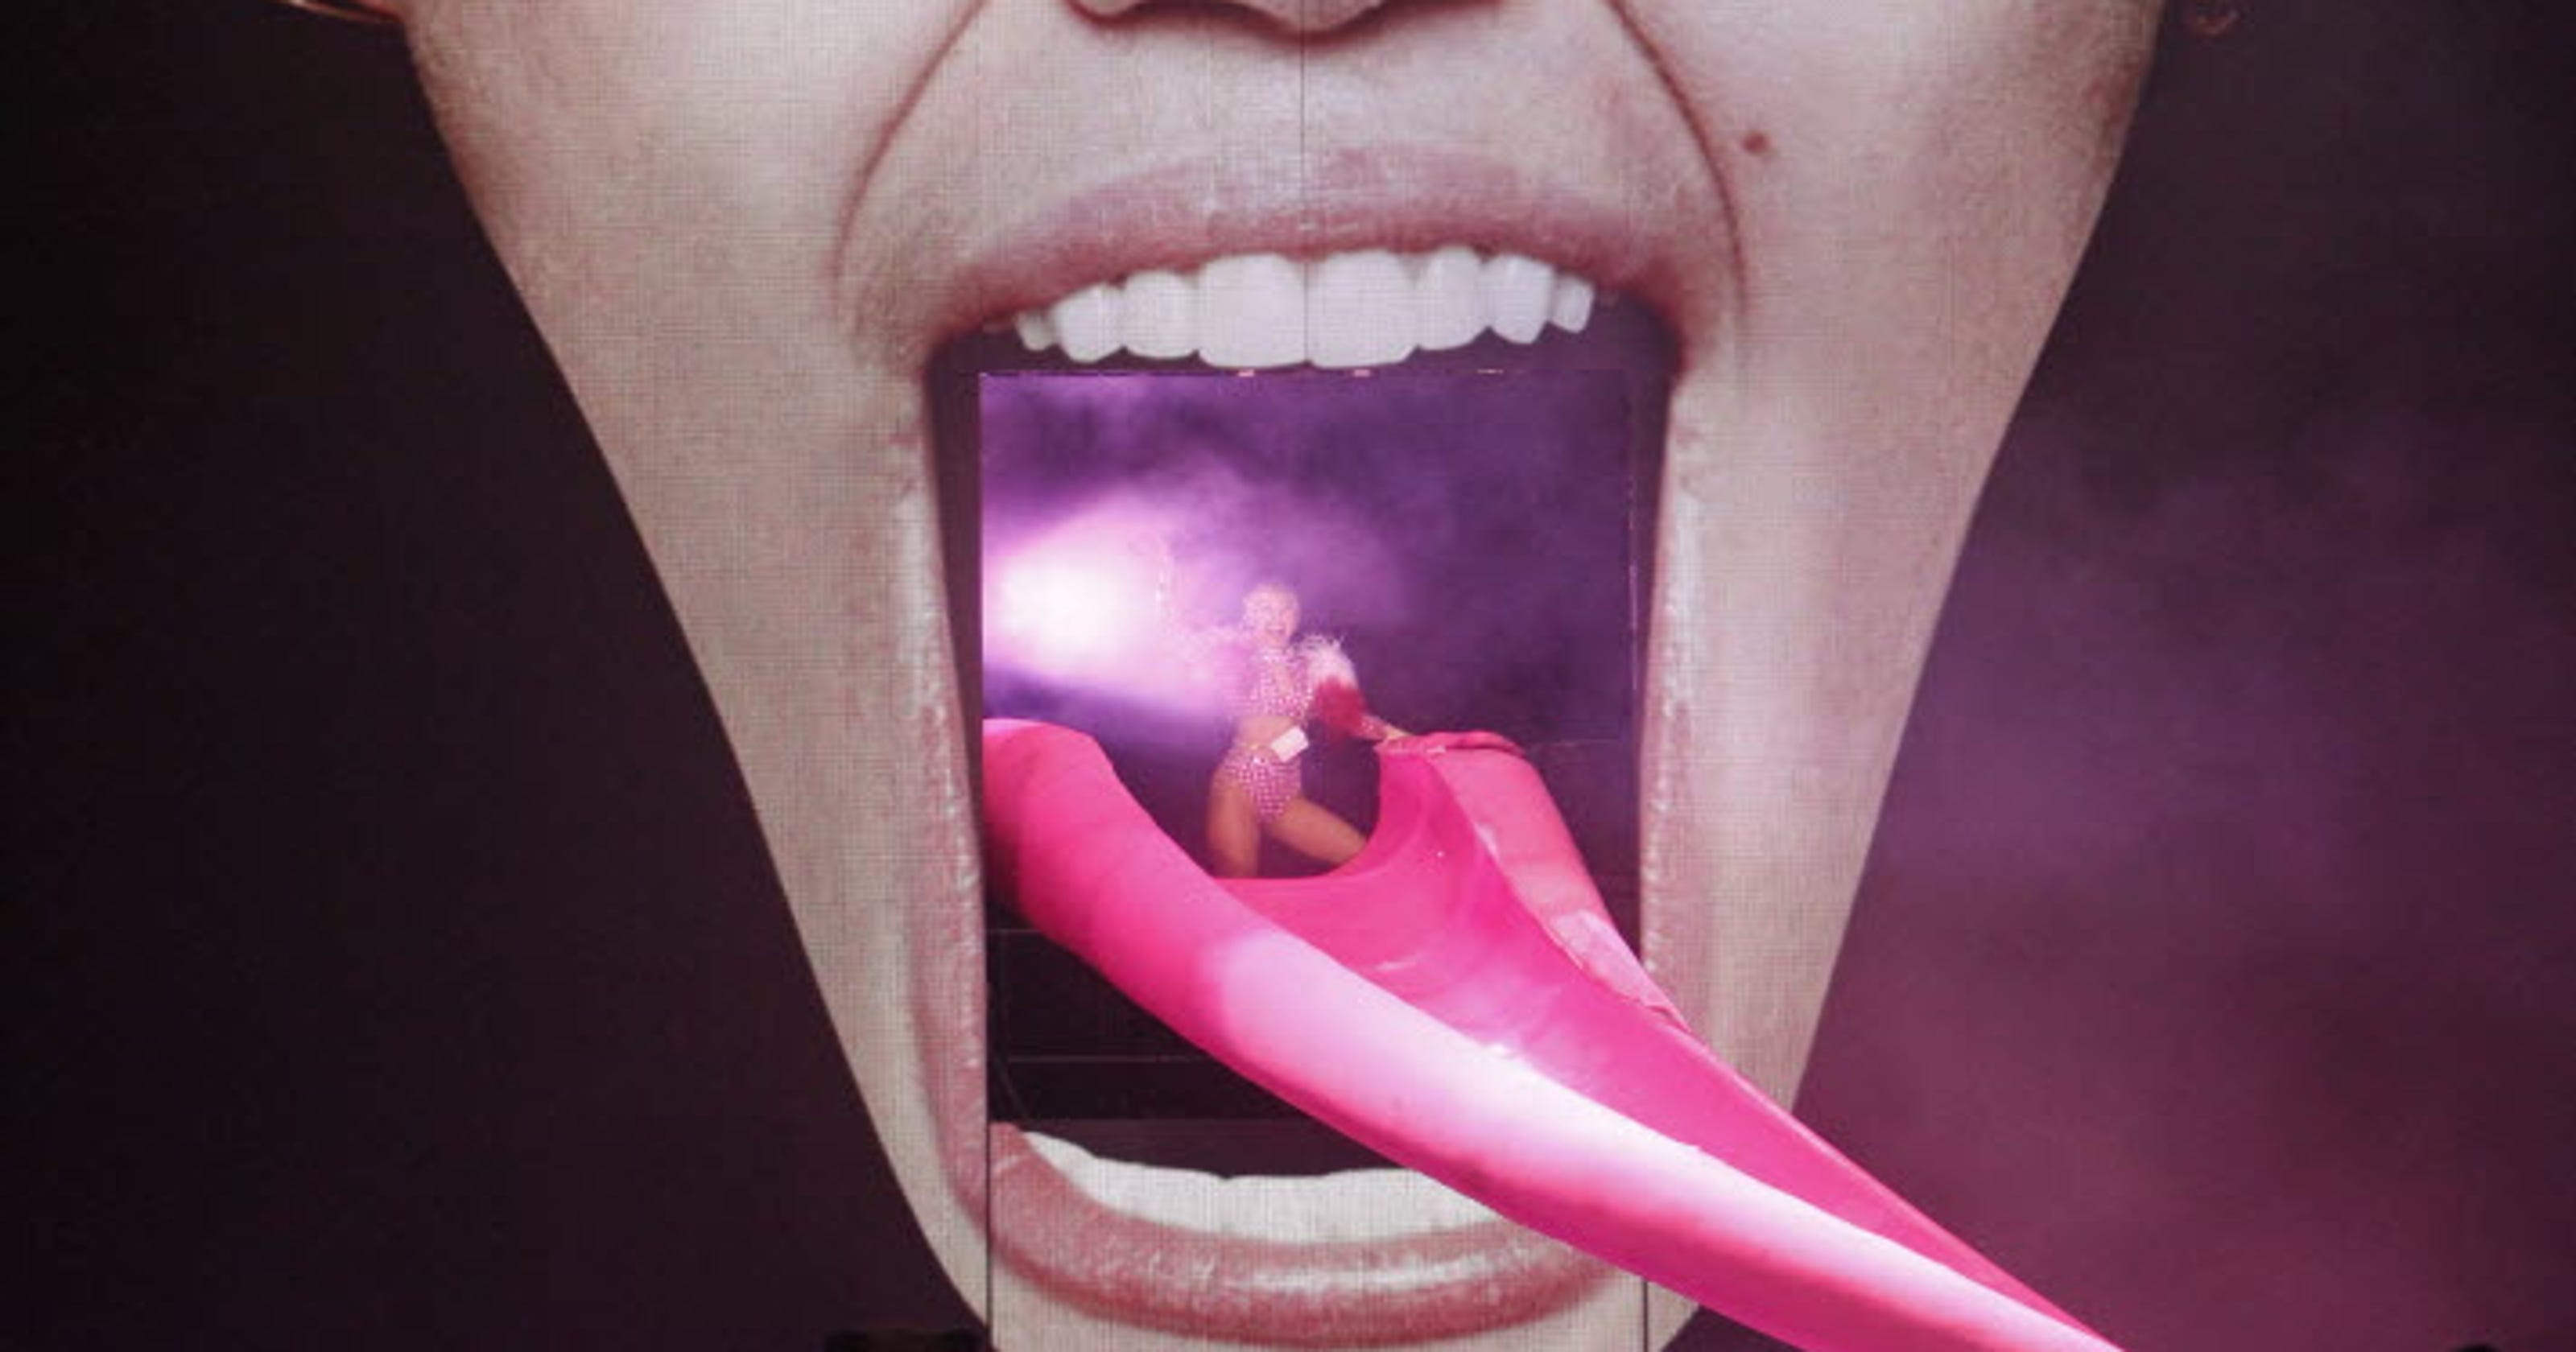 Miley Cyrus Tongue Slide Leads To Lawsuit 